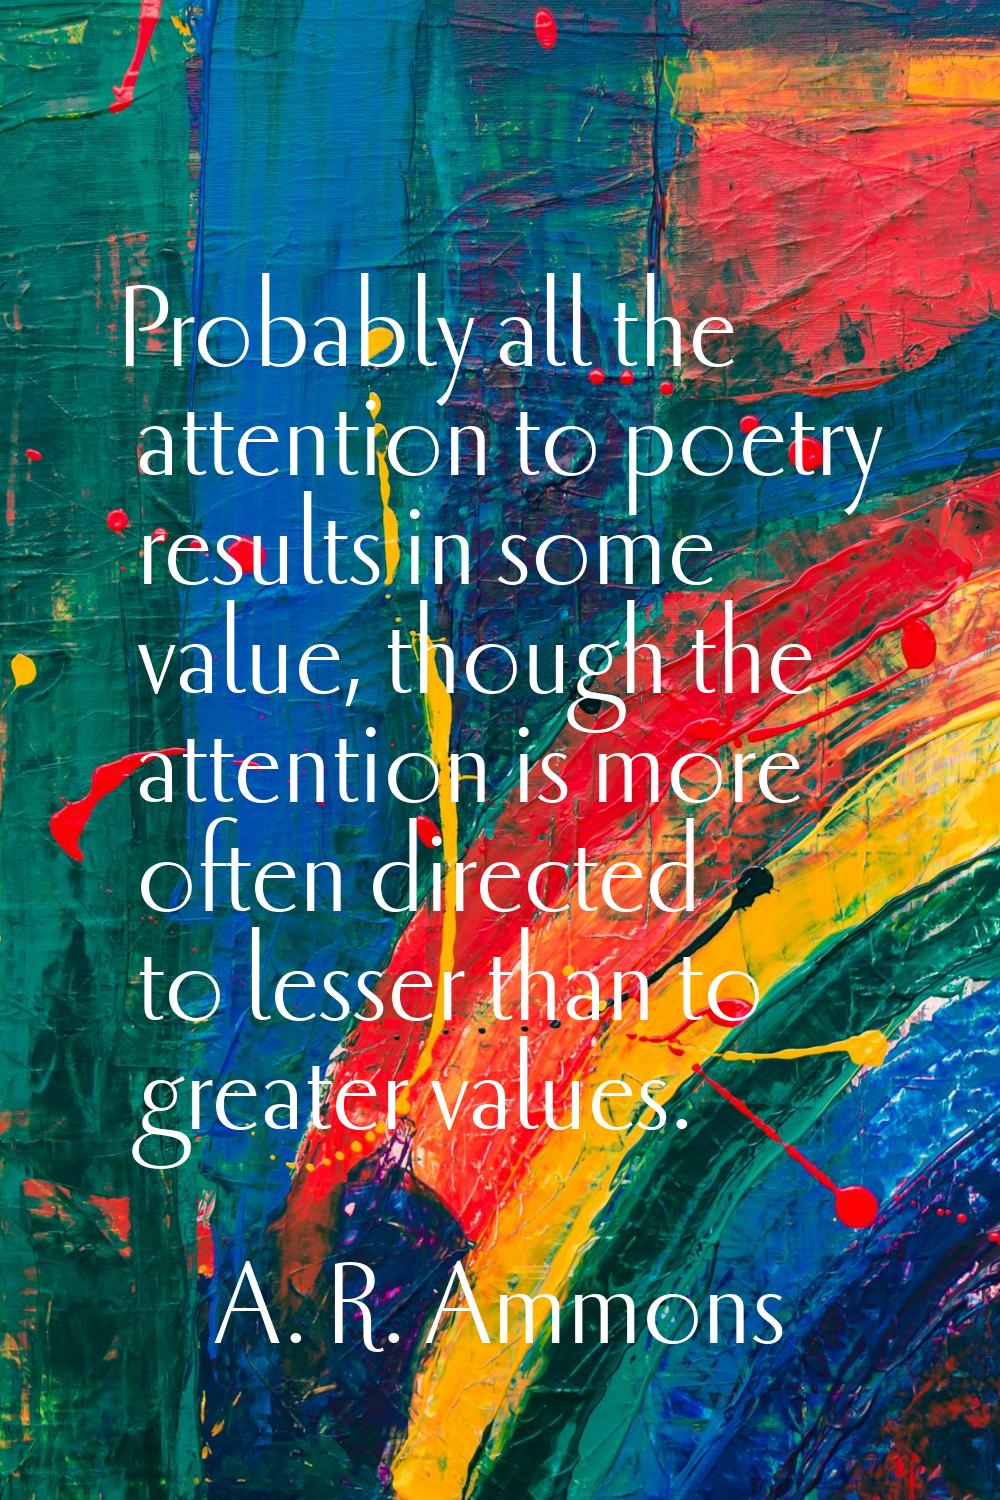 Probably all the attention to poetry results in some value, though the attention is more often dire